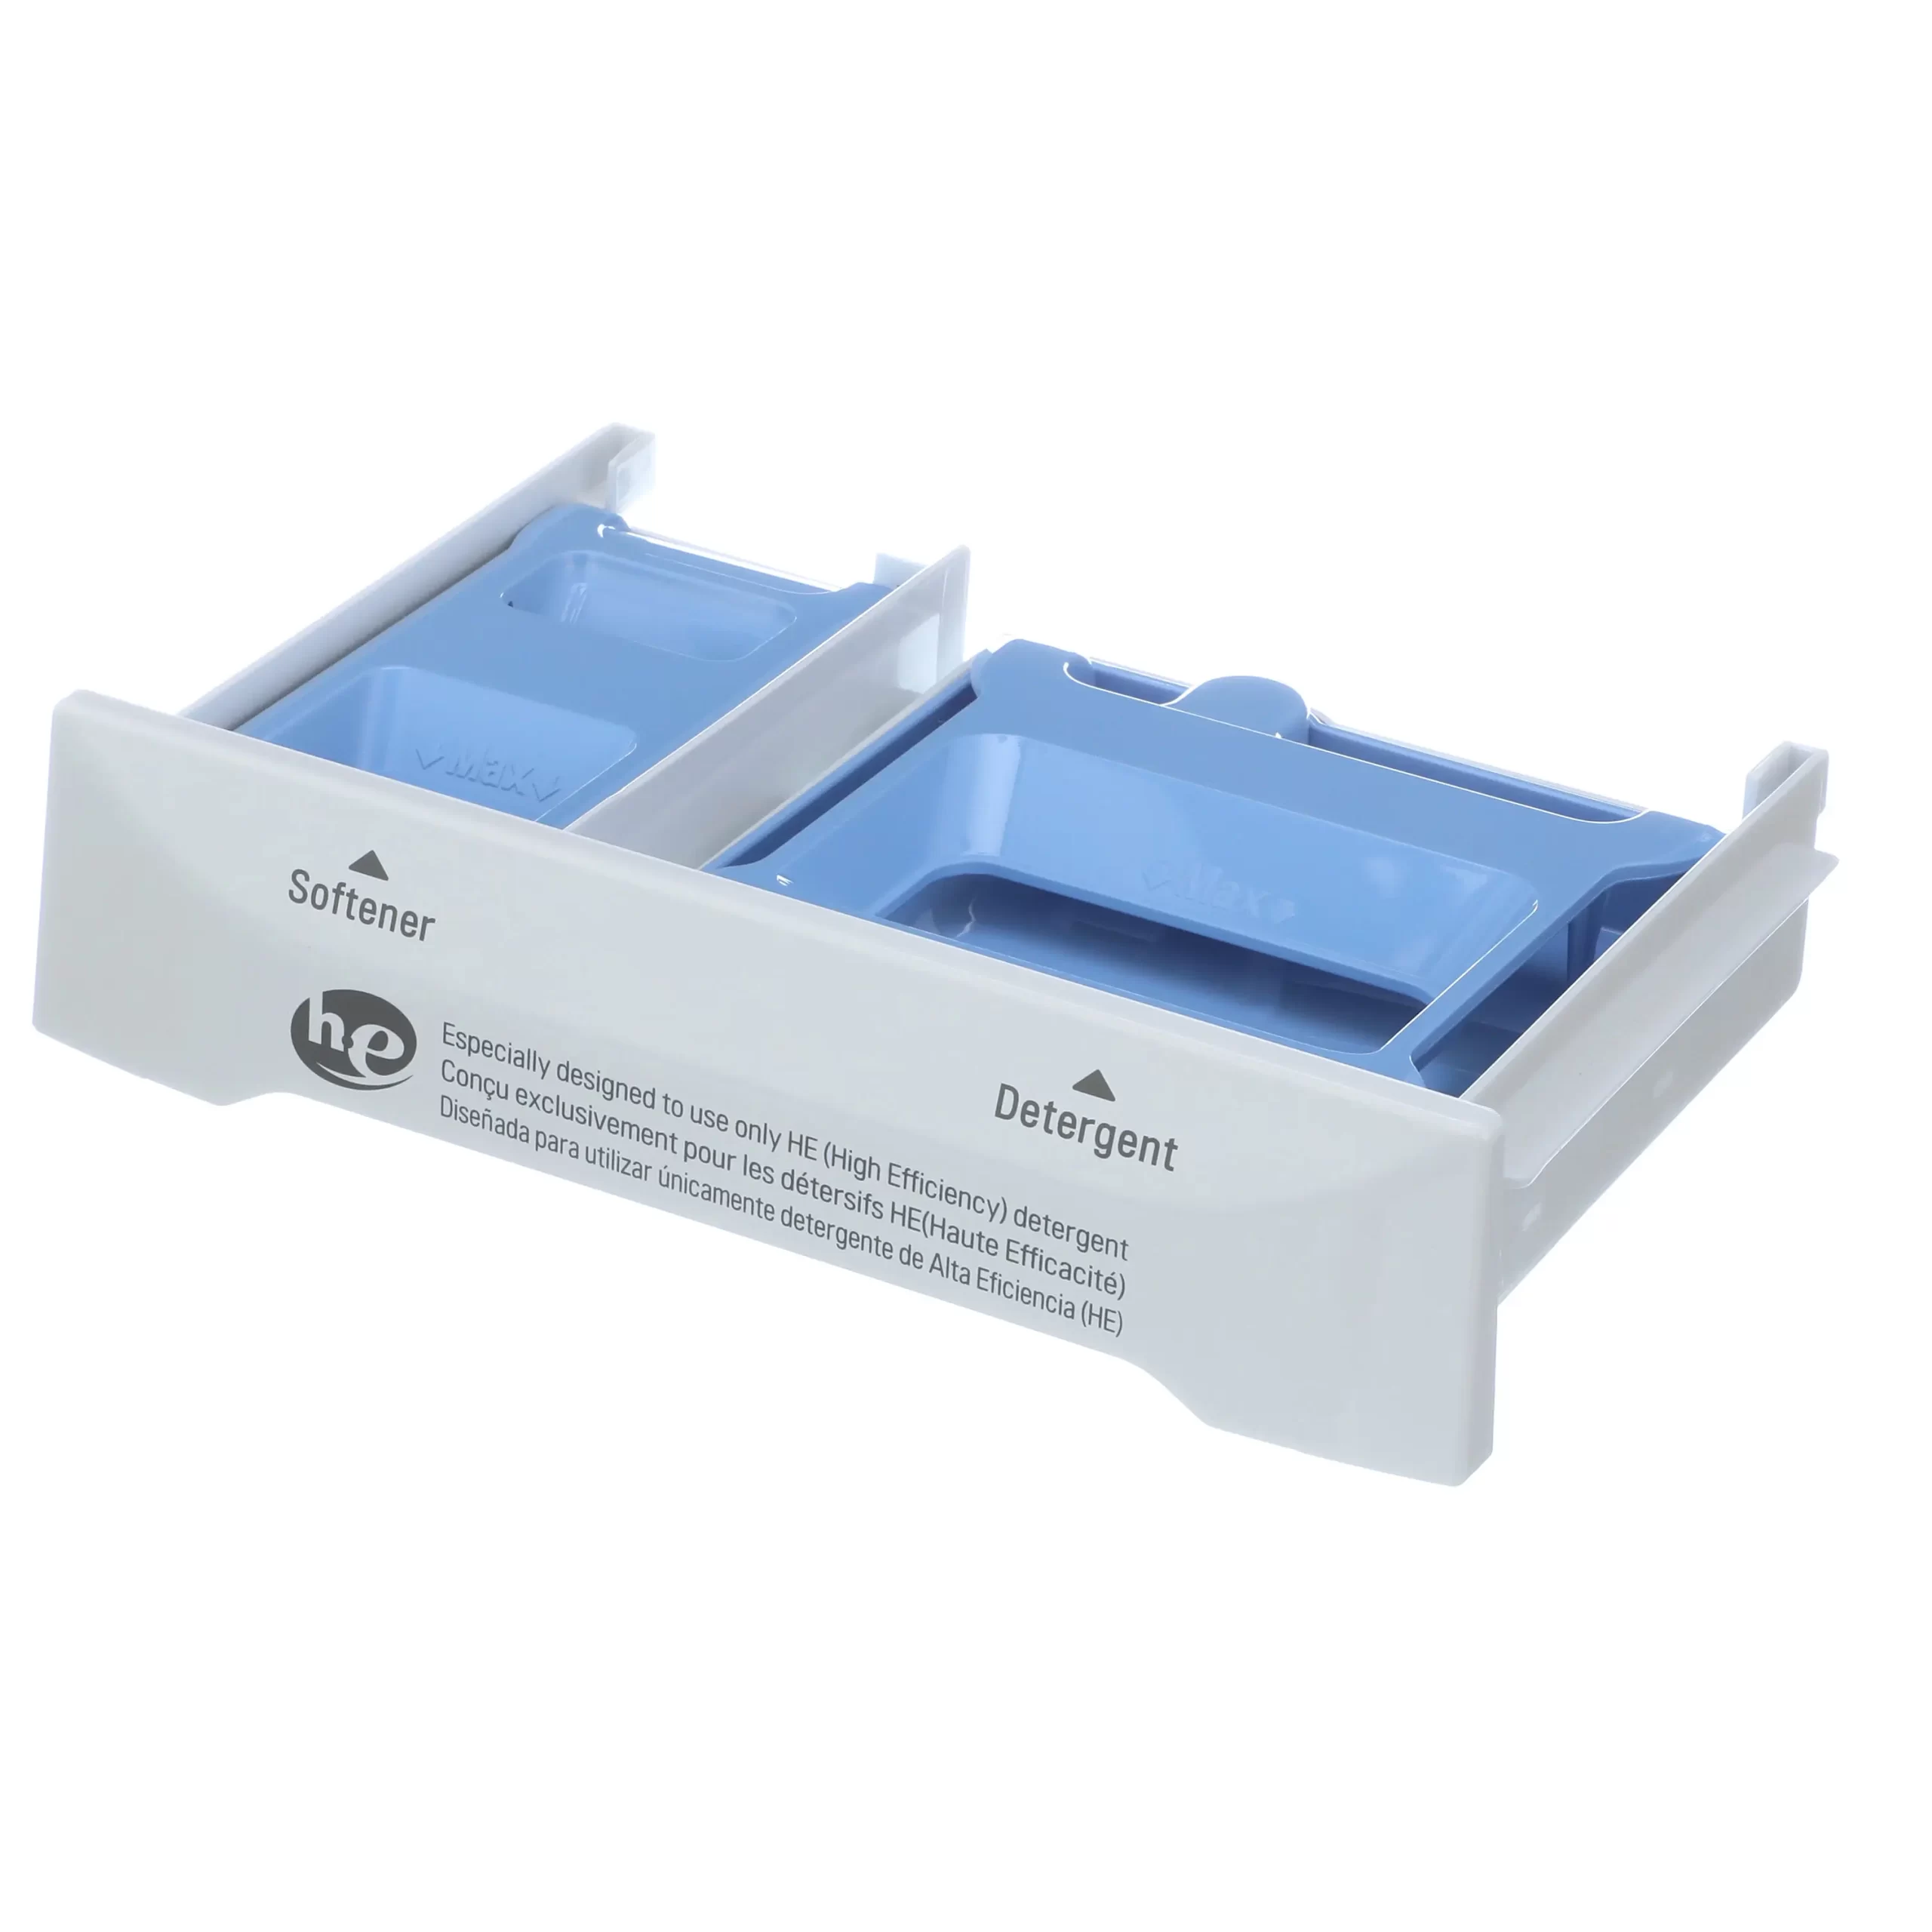 LG Washer Detergent Box Assembly. Part #AAZ72925601